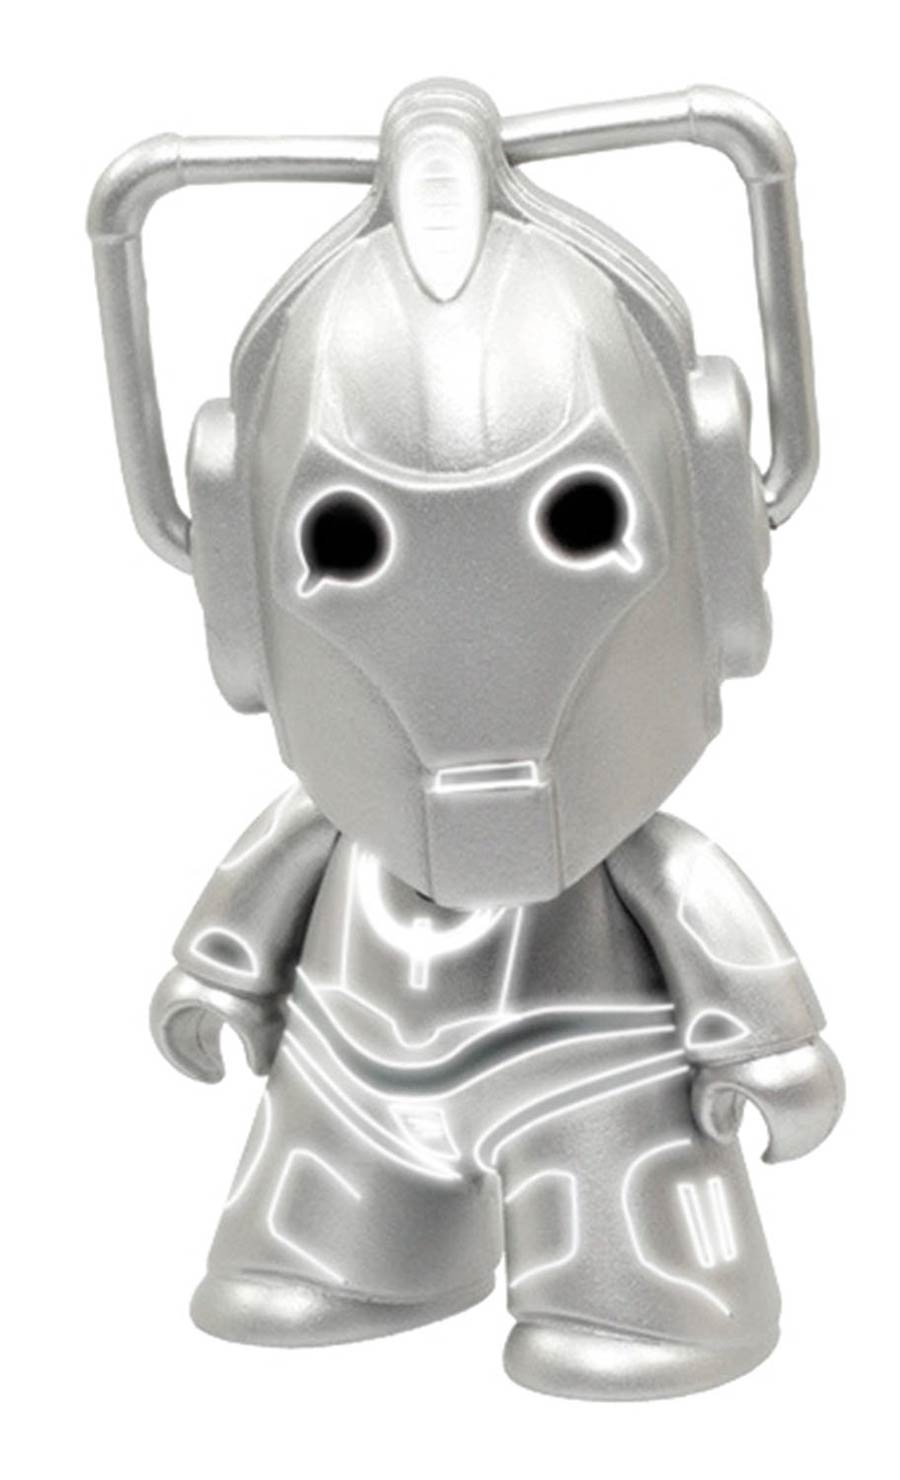 Doctor Who Titans Army Of Ghosts Cyberman 3-Inch Previews Exclusive Vinyl Figure